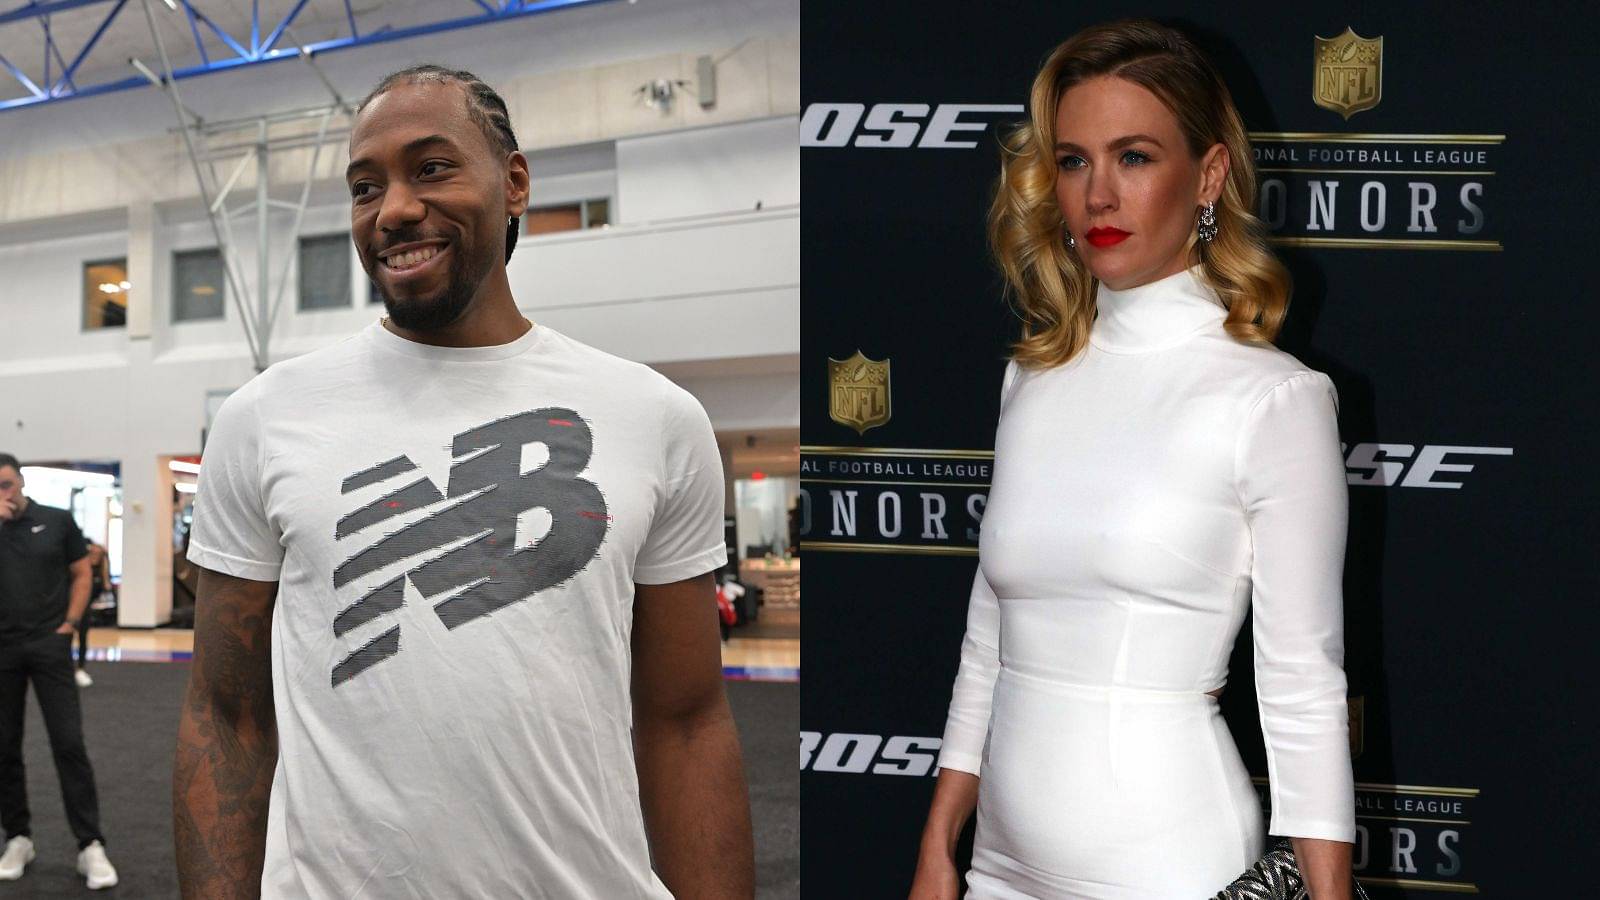 “Kawhi Leonard, Future Boyfriend?”: $10M Worth January Jones Once Publicly Expressed Her Crush on the Committed Clippers Star